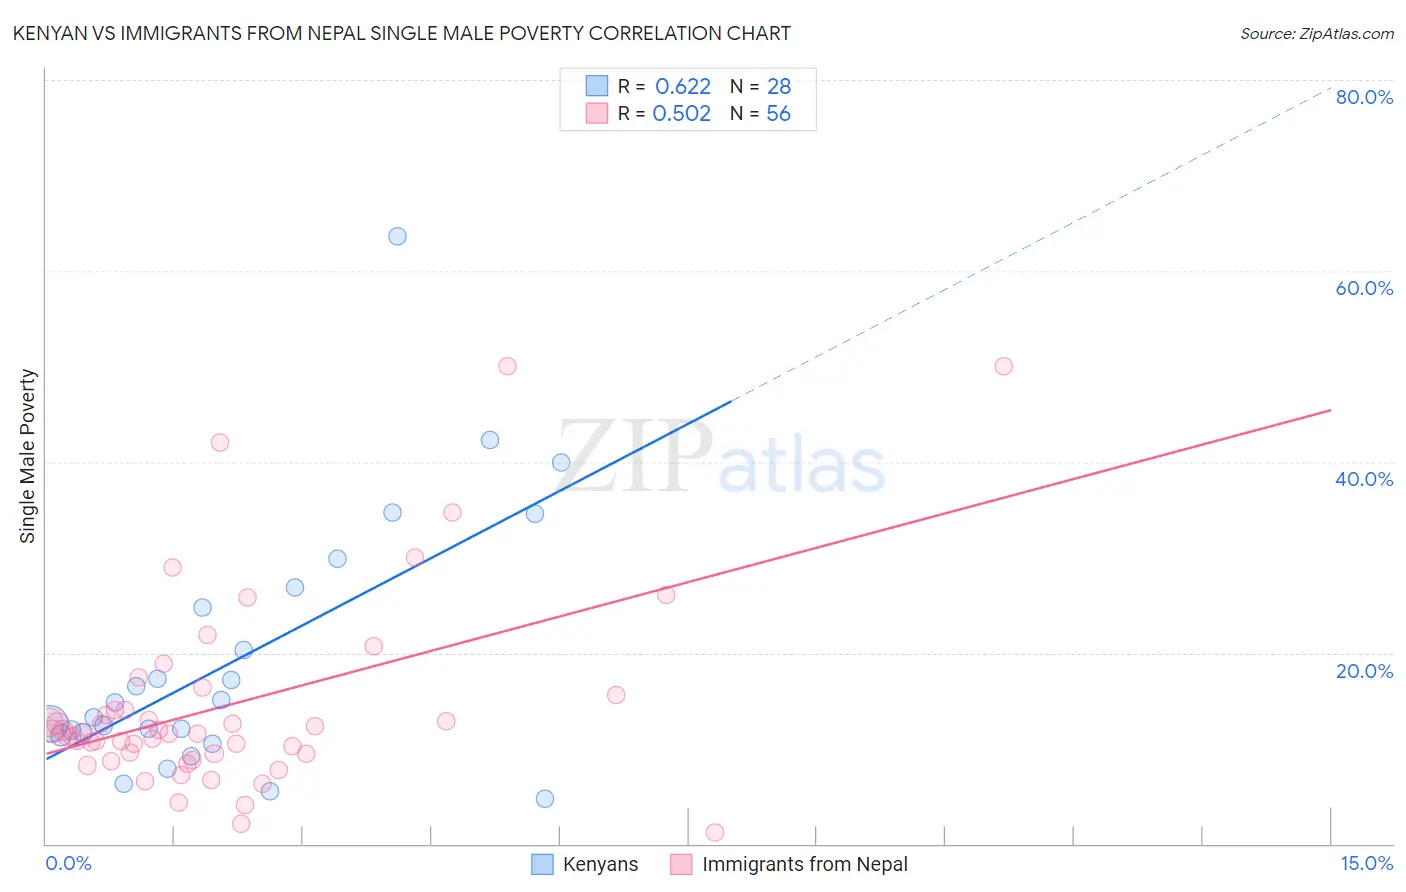 Kenyan vs Immigrants from Nepal Single Male Poverty